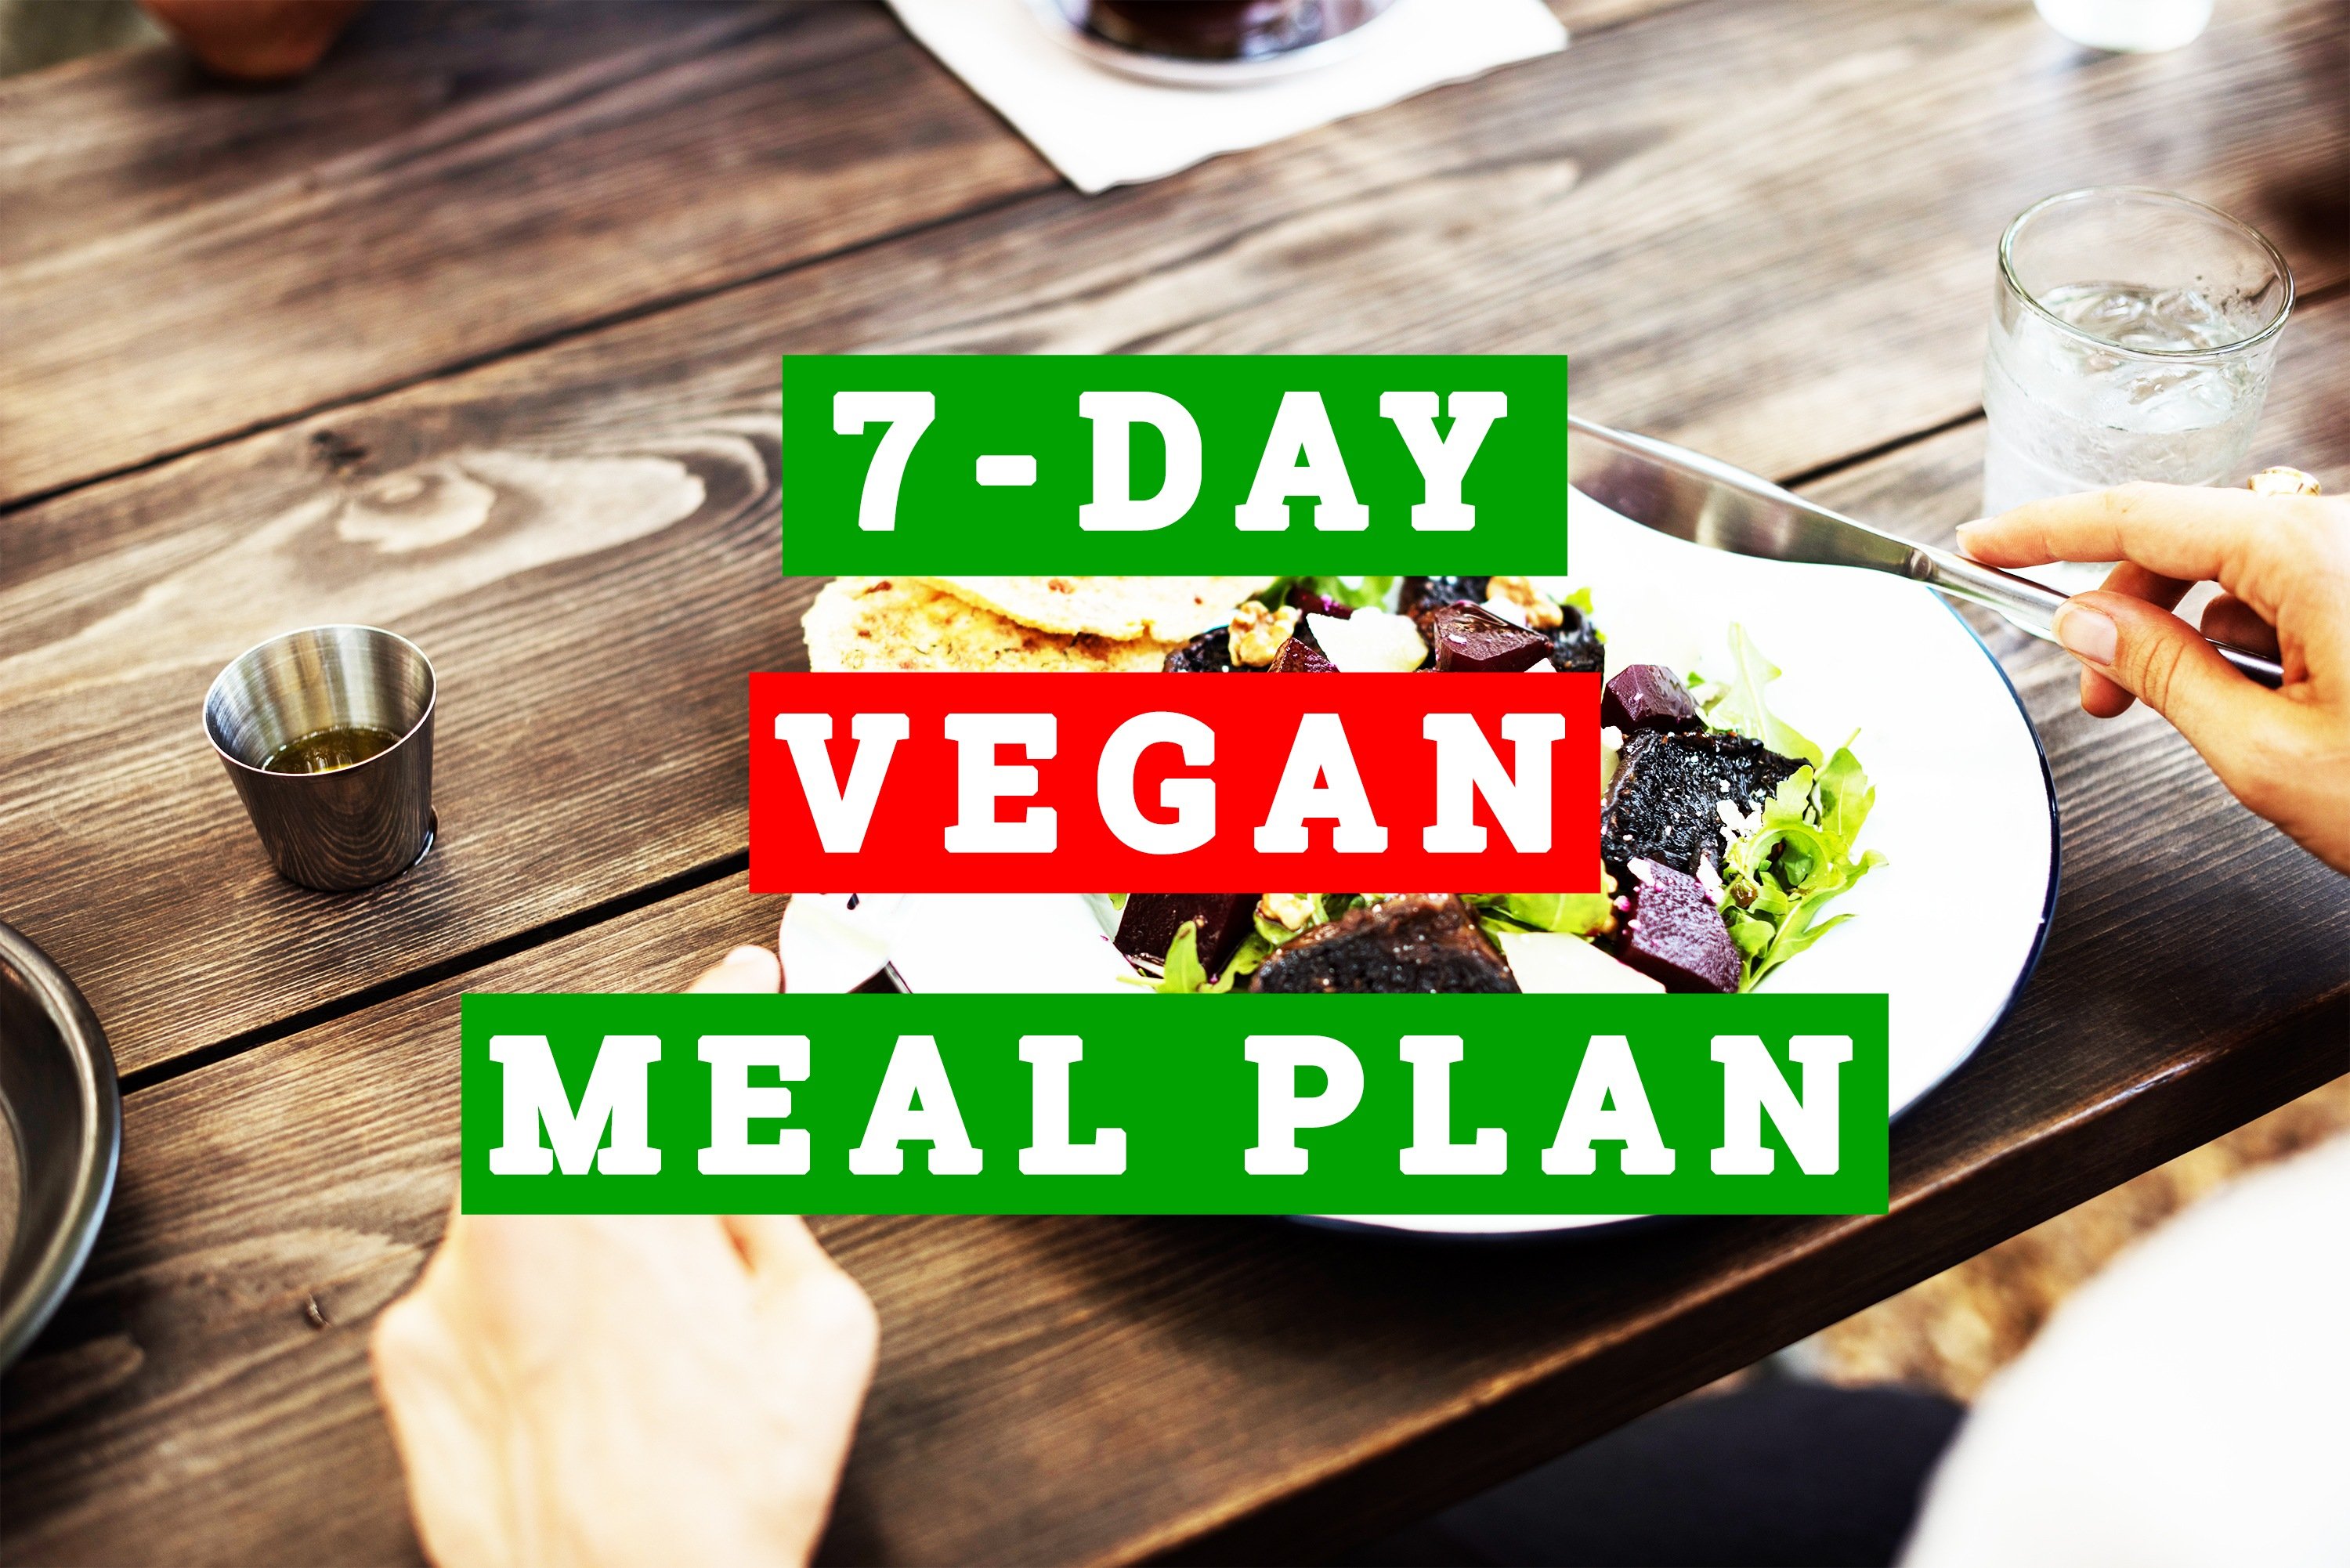 7-Day Vegan Diet Plan: Eat Healthy with Under 2,000 Calories per Day